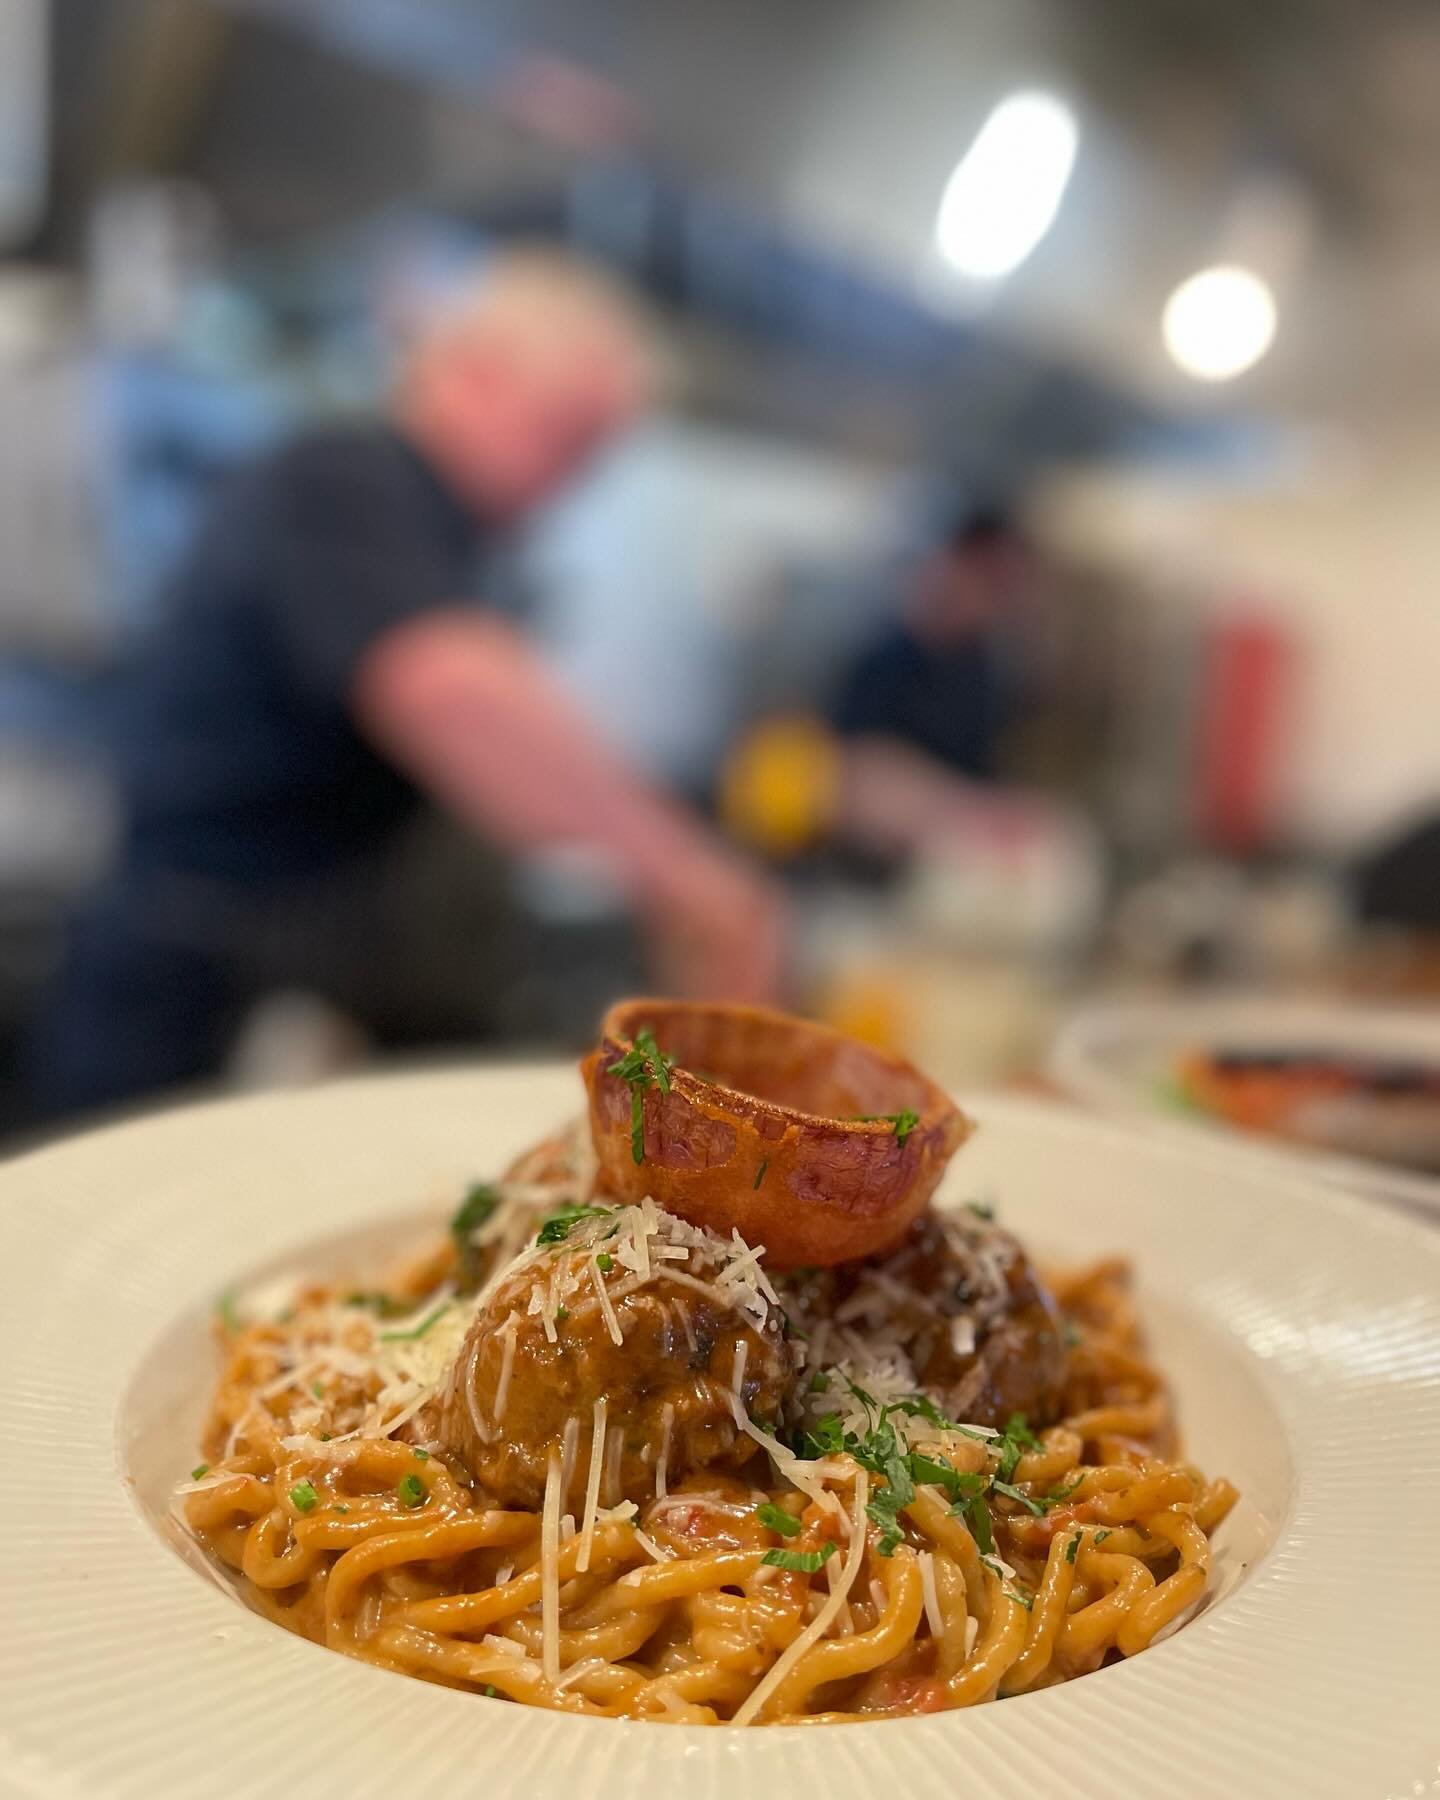 Cloudy with a chance of meatballs ☁️🍝🌑

It may have been cloudy in the Finger Lakes today, but the total eclipse sure brought the energy to our dining room! ⚡️

Some of our prix fixe features tonight included house made spaghetti &amp; asteroids, c